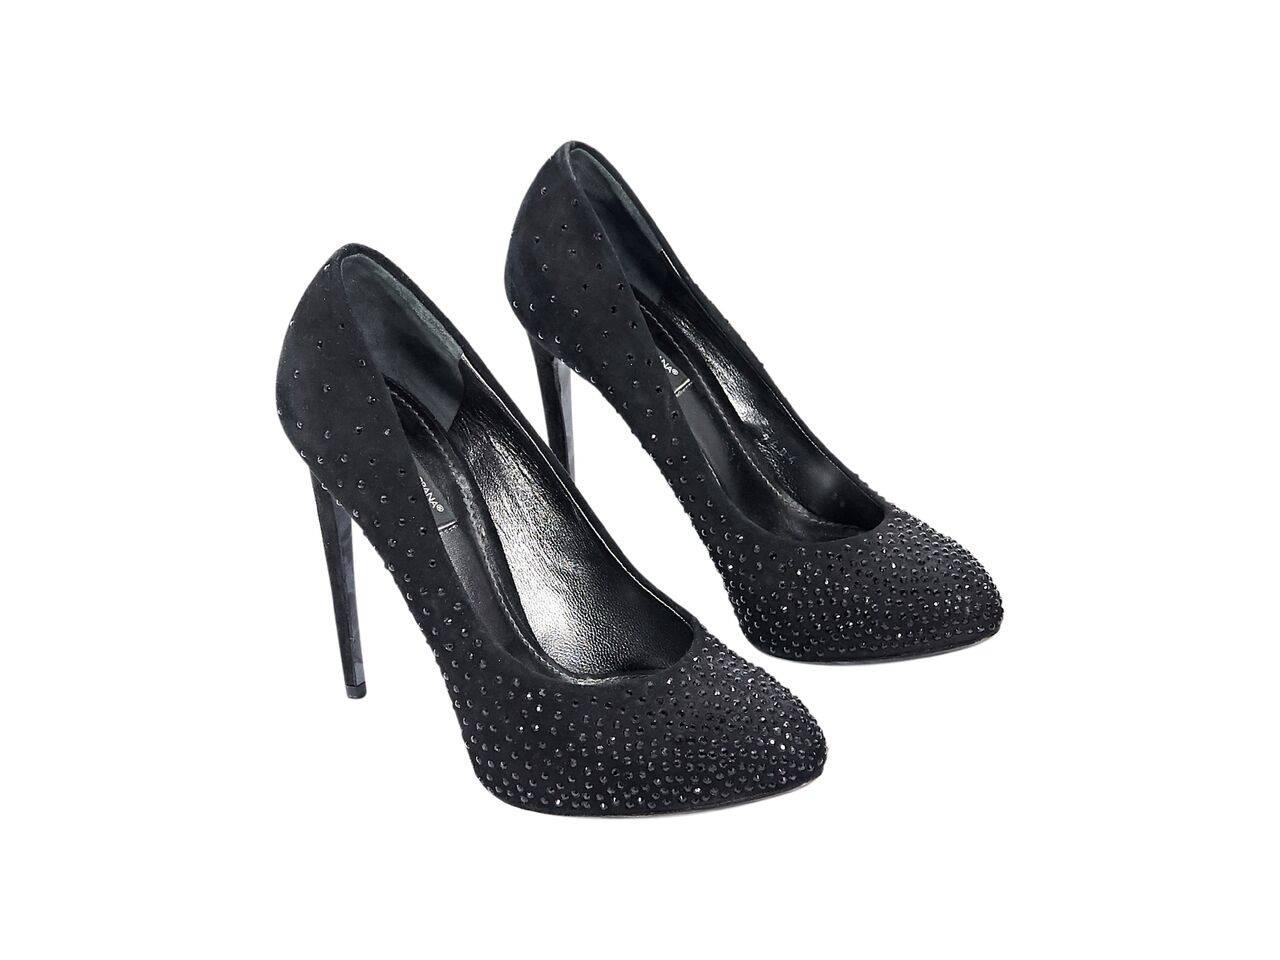 Product details:  Black suede pumps by Dolce & Gabbana.  Embellished with black crystals.  Round almond toe.  Slip-on style. 
Condition: Pre-owned. Very good.
Est. Retail $ 975.00